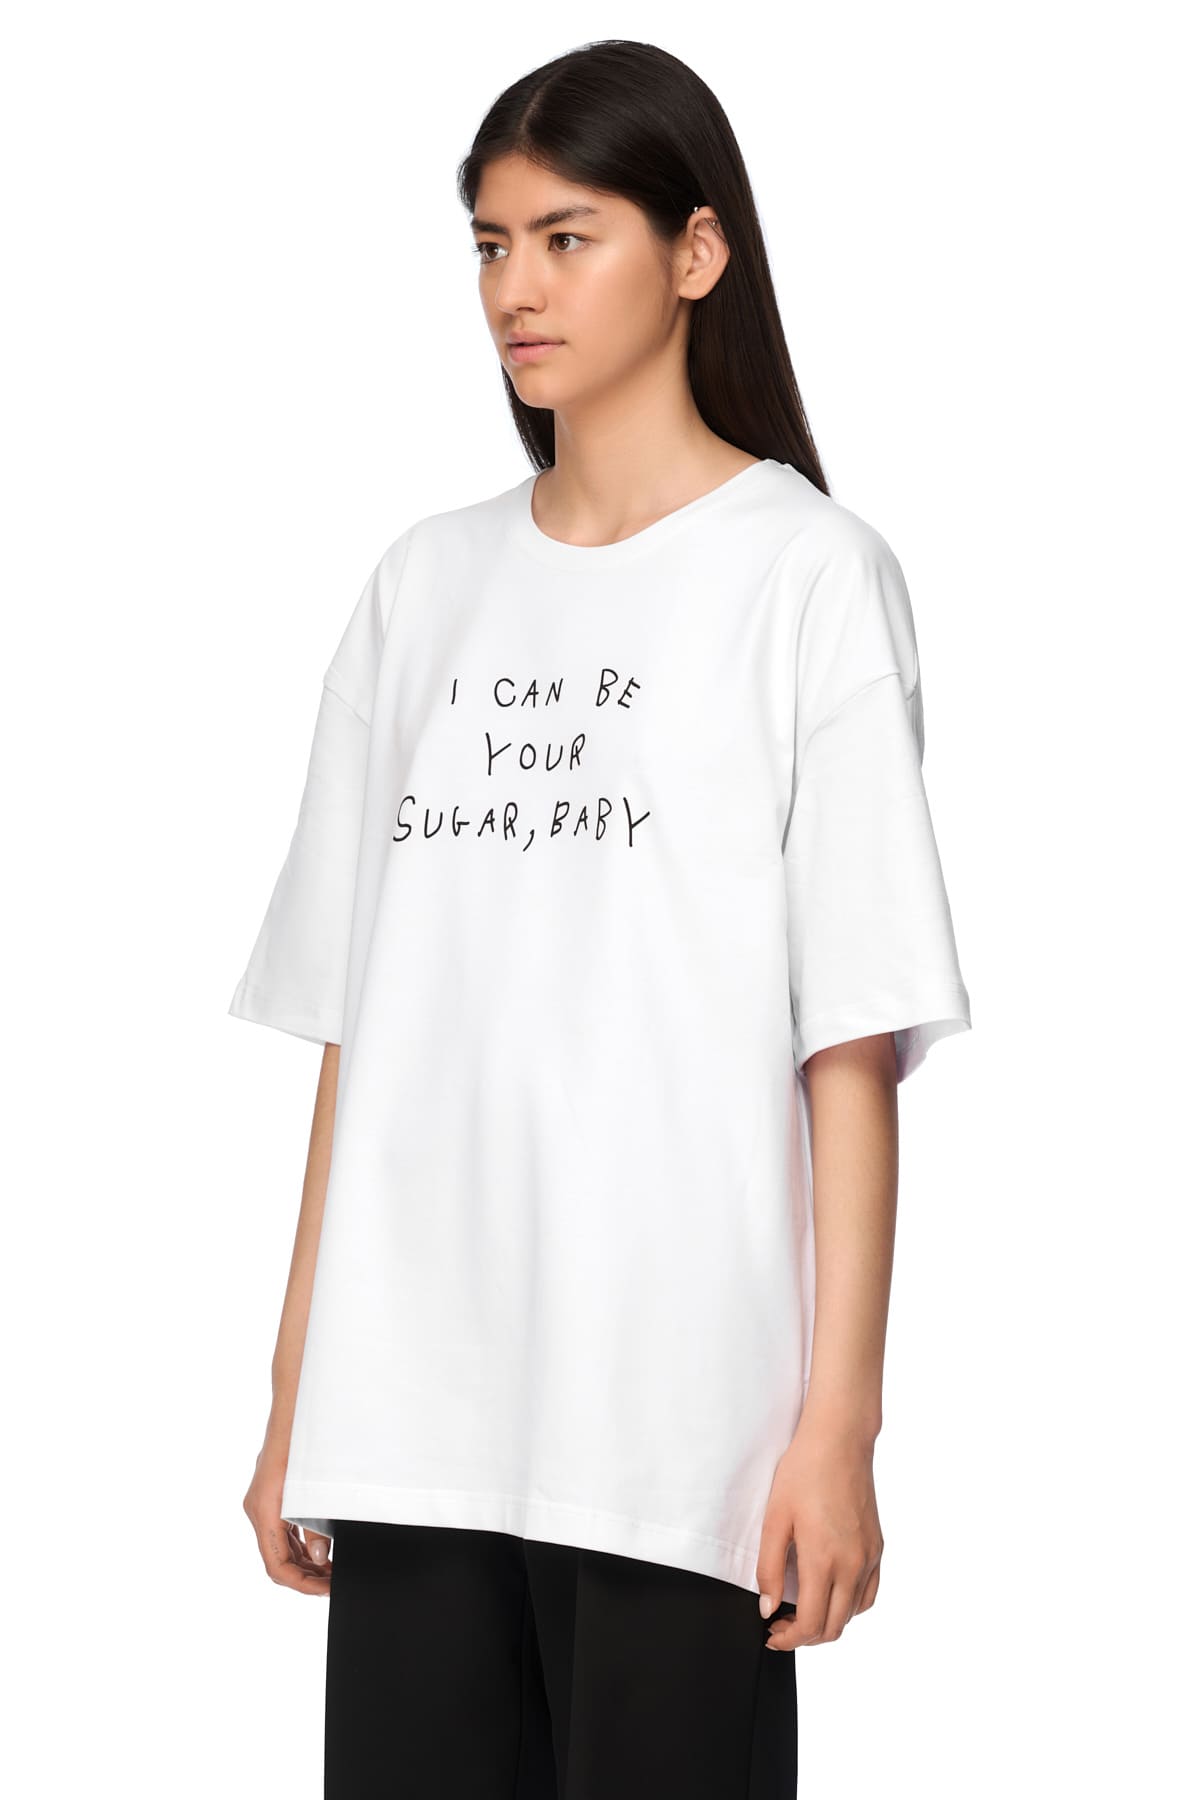 I can be your sugar, baby T-Shirt